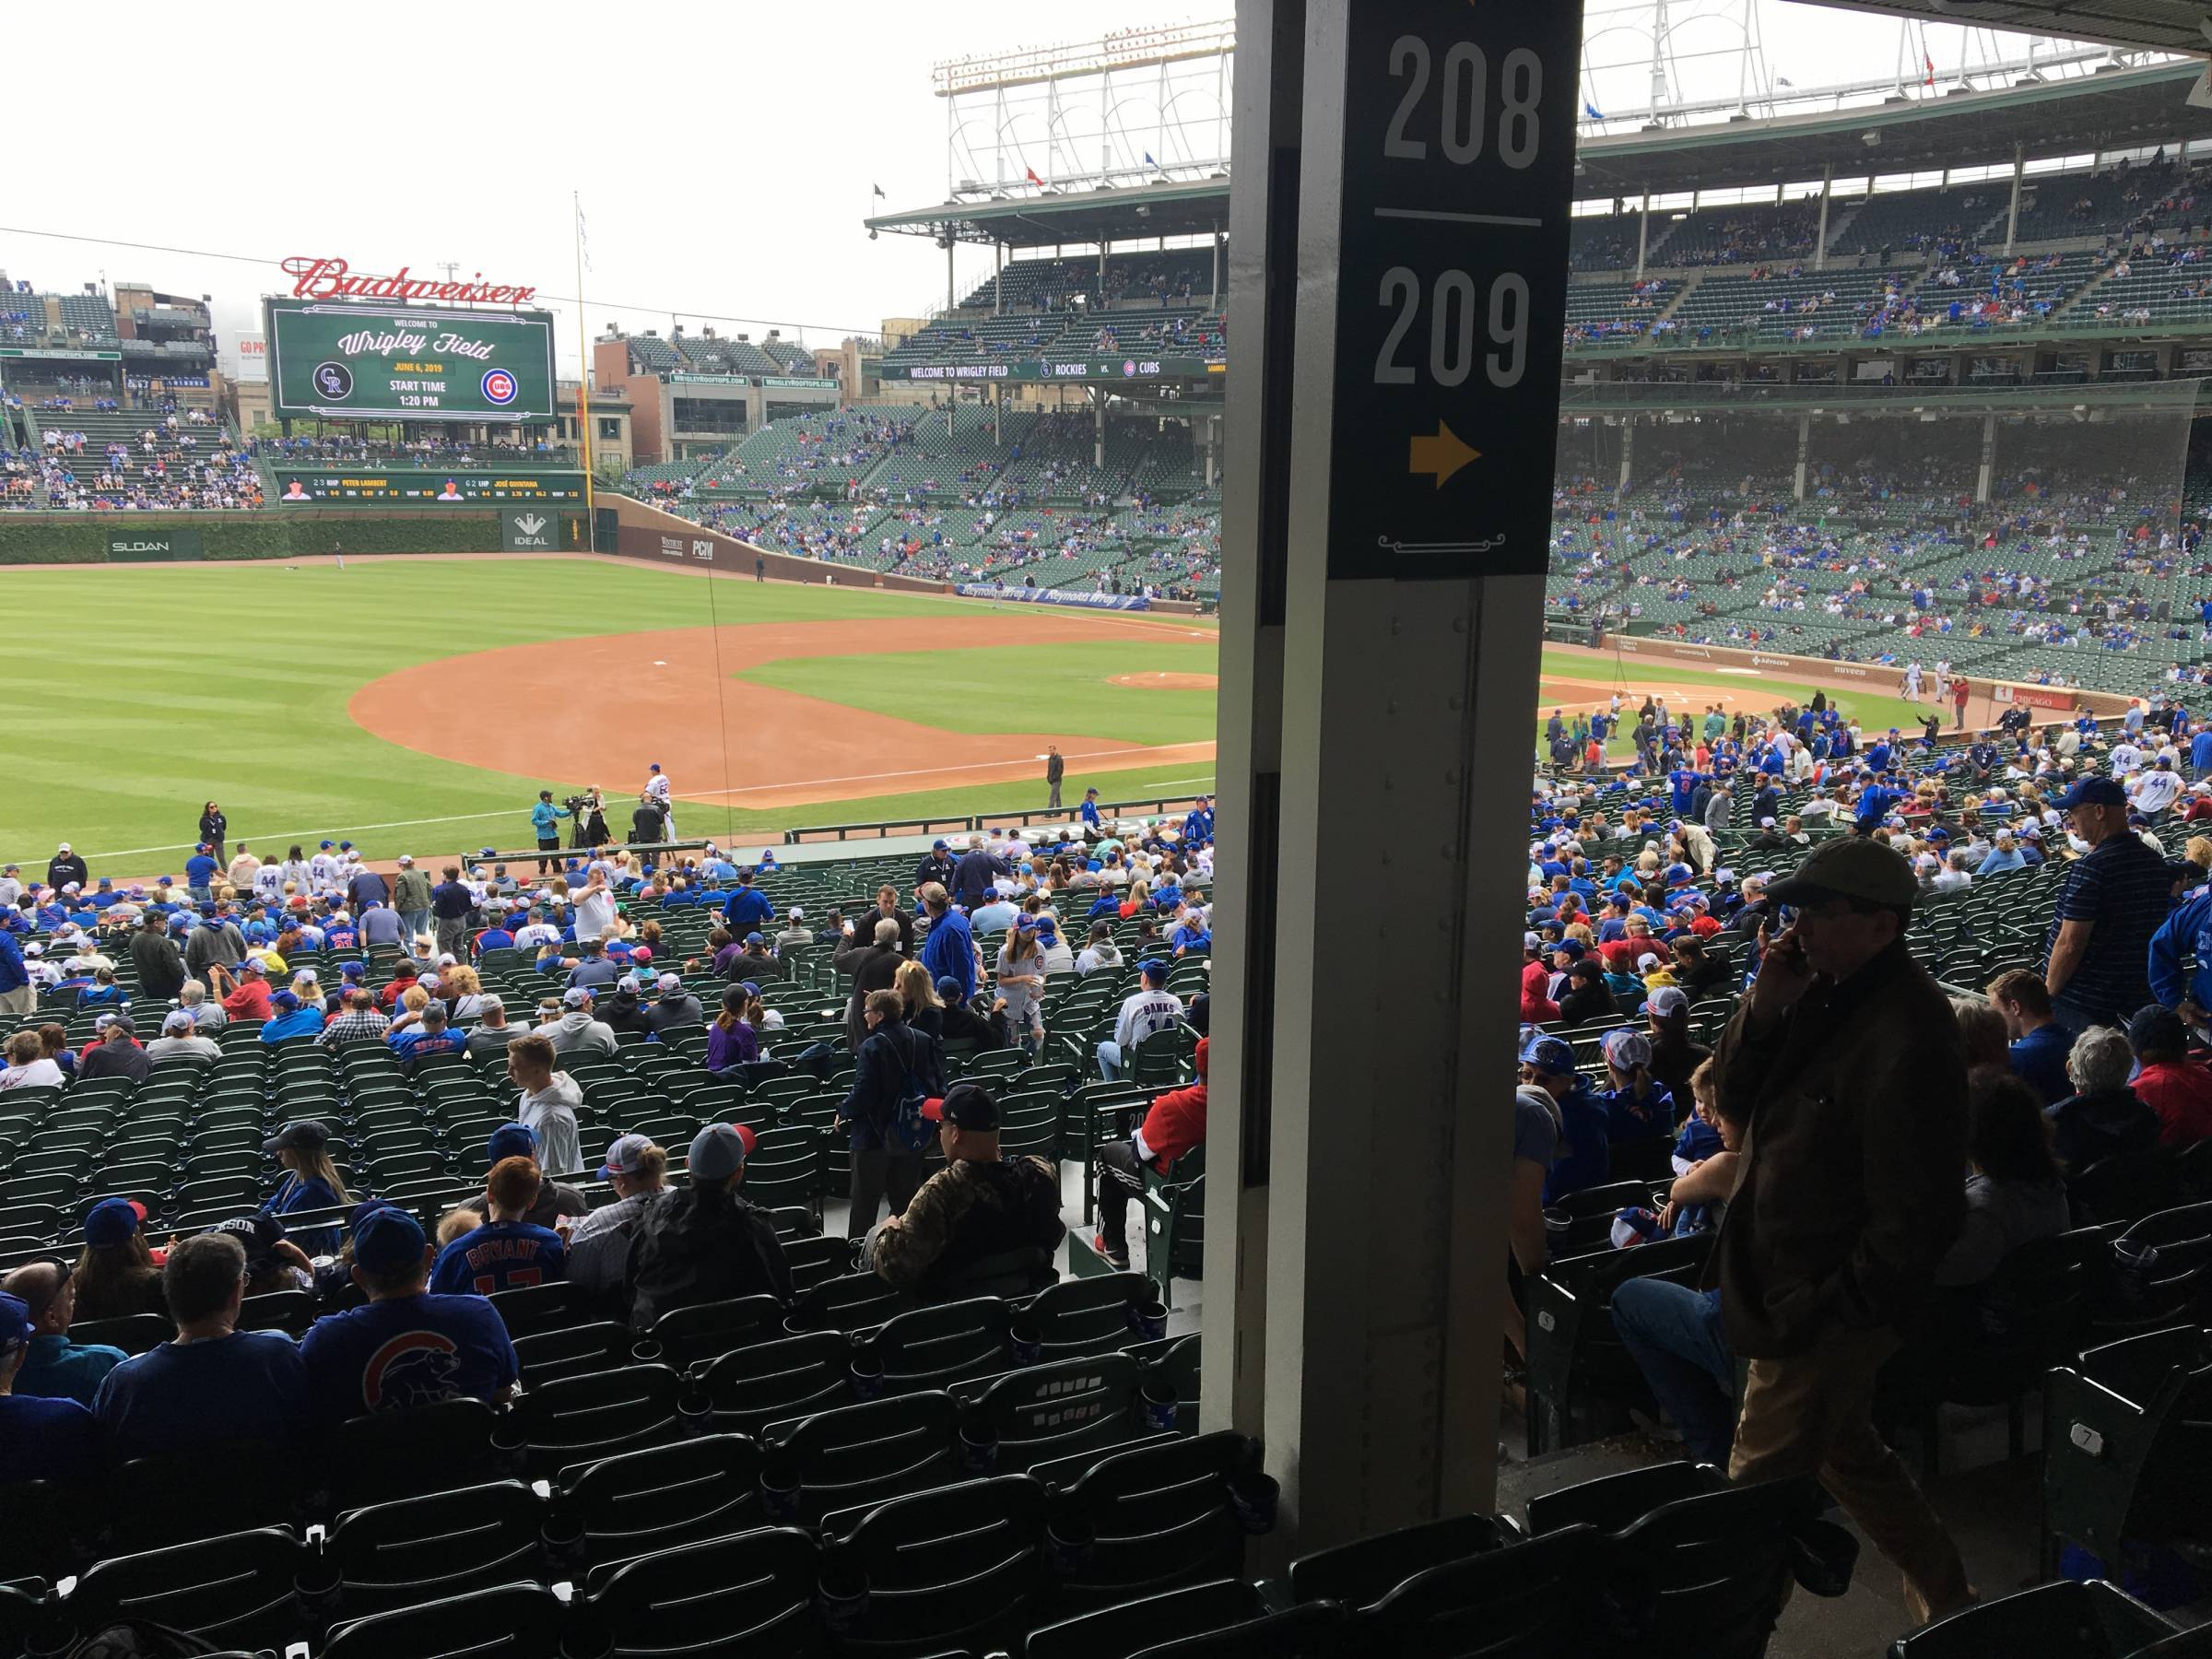 Pole in Section 208 at Wrigley Field